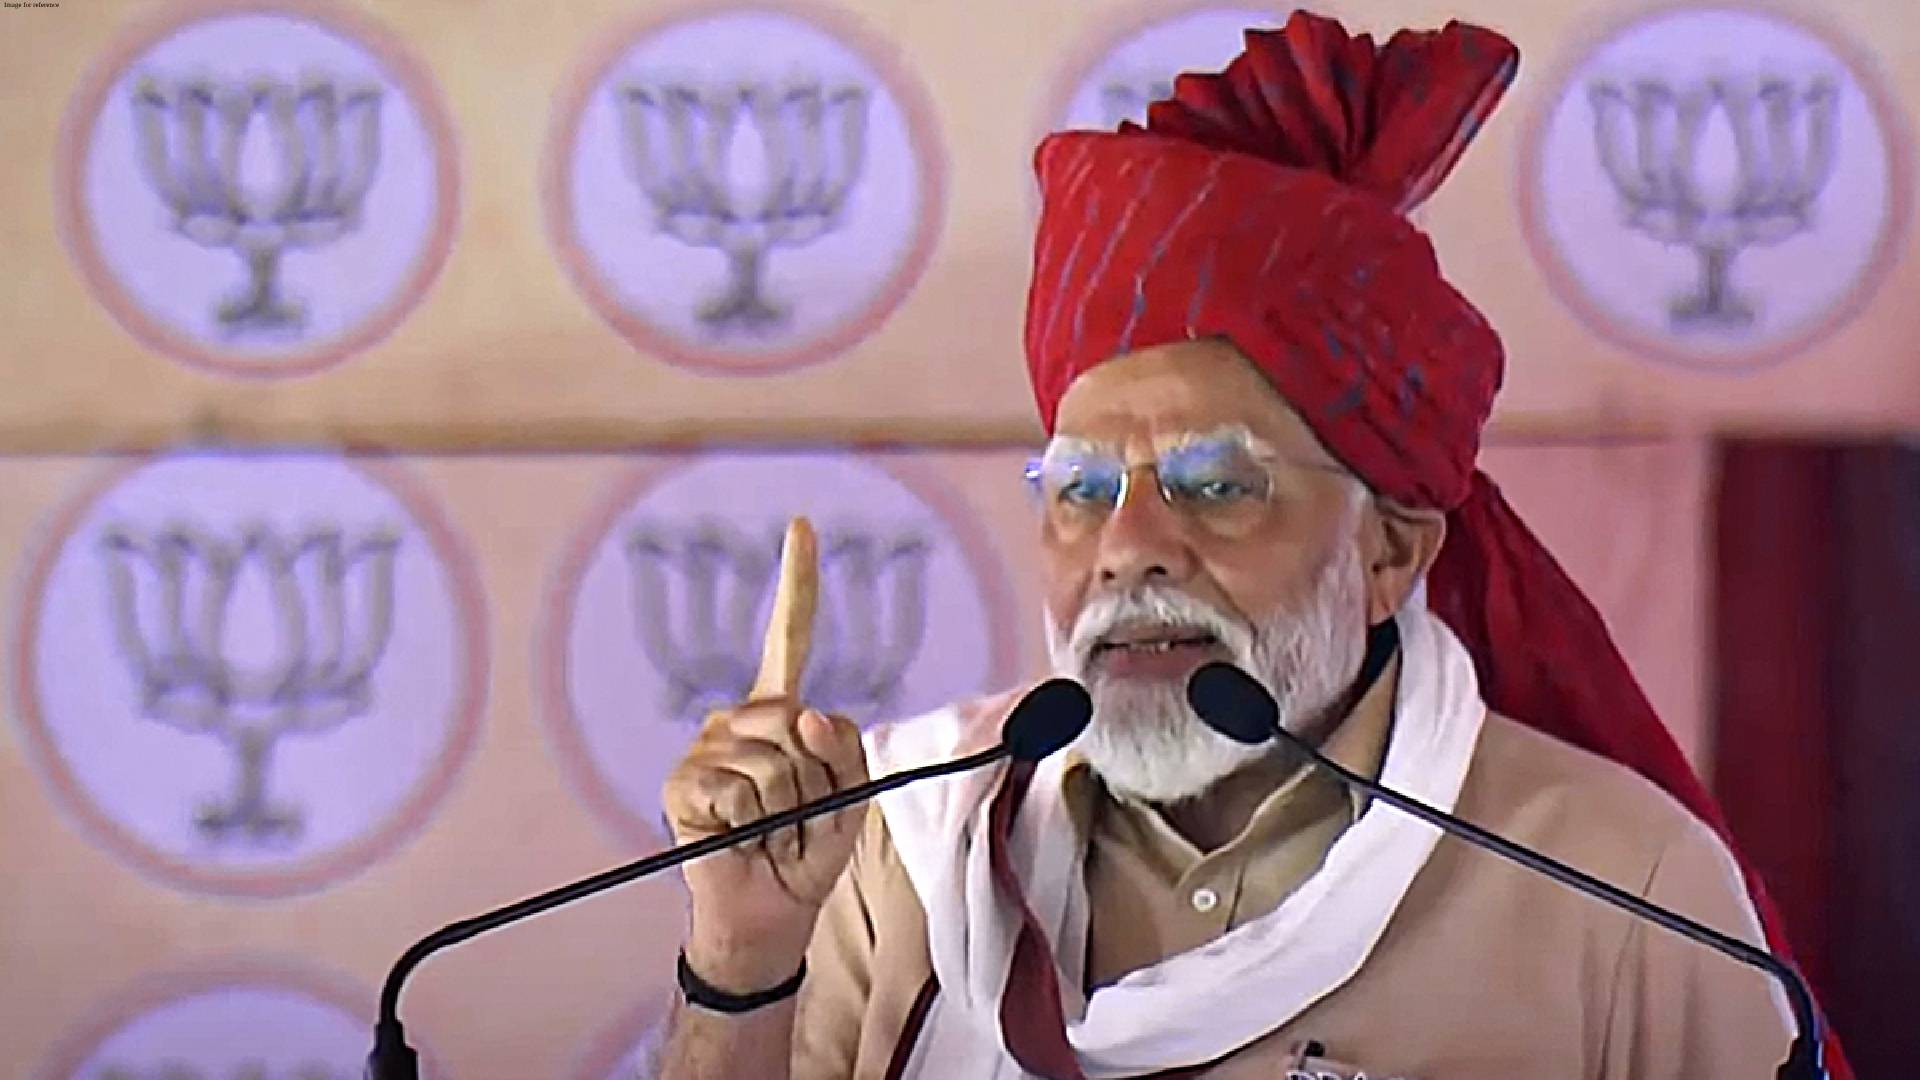 Work done in 10 years just a trailer, lot more yet to come: PM Modi at Churu rally